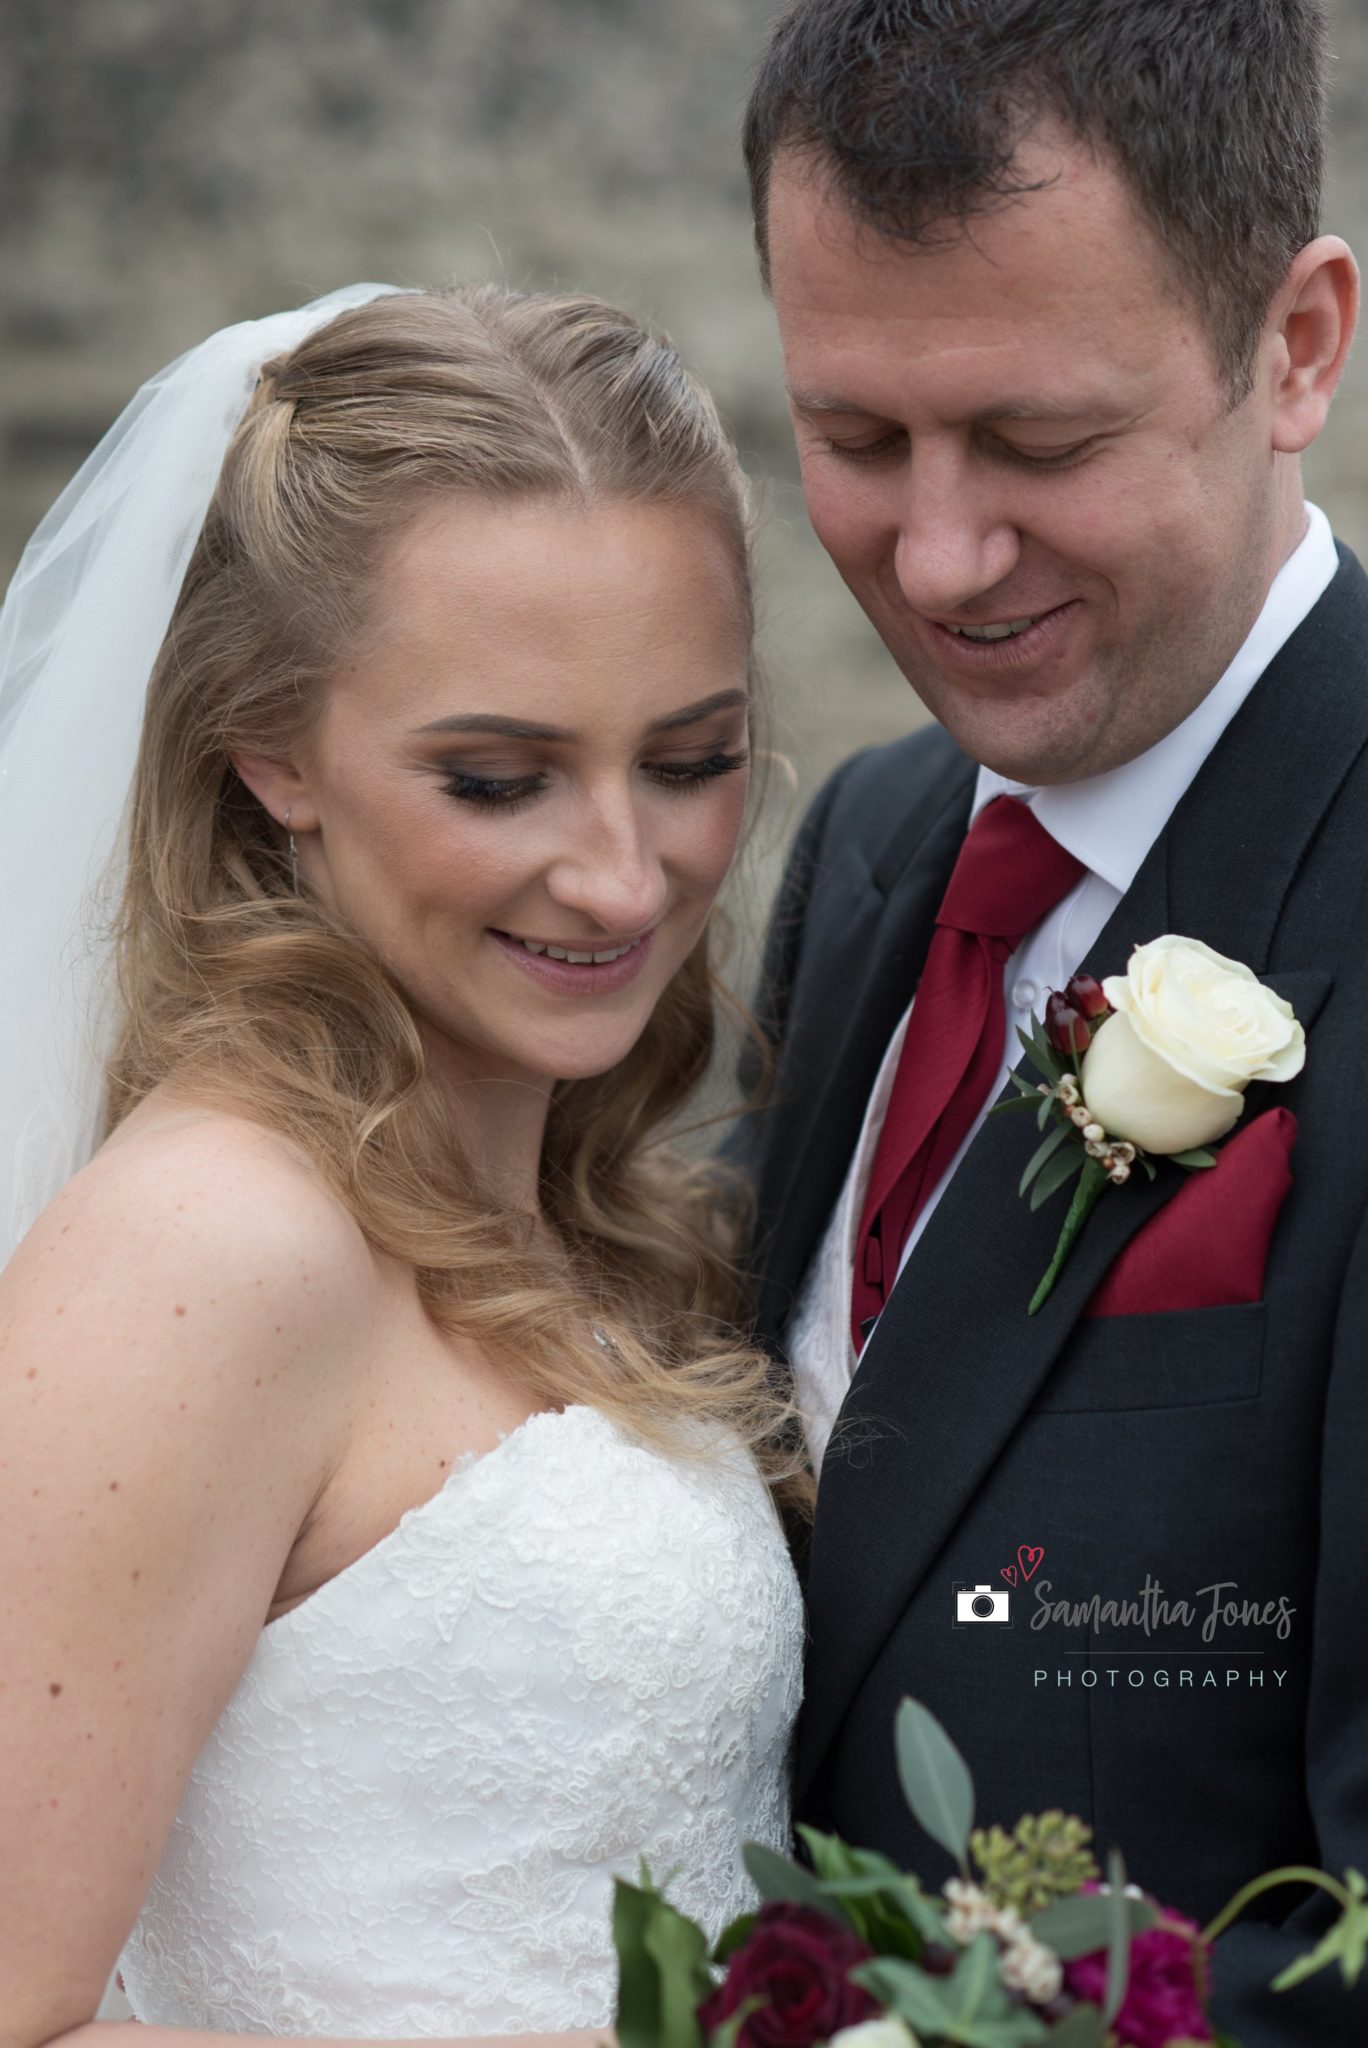 Wedding at Cooling Castle Barn